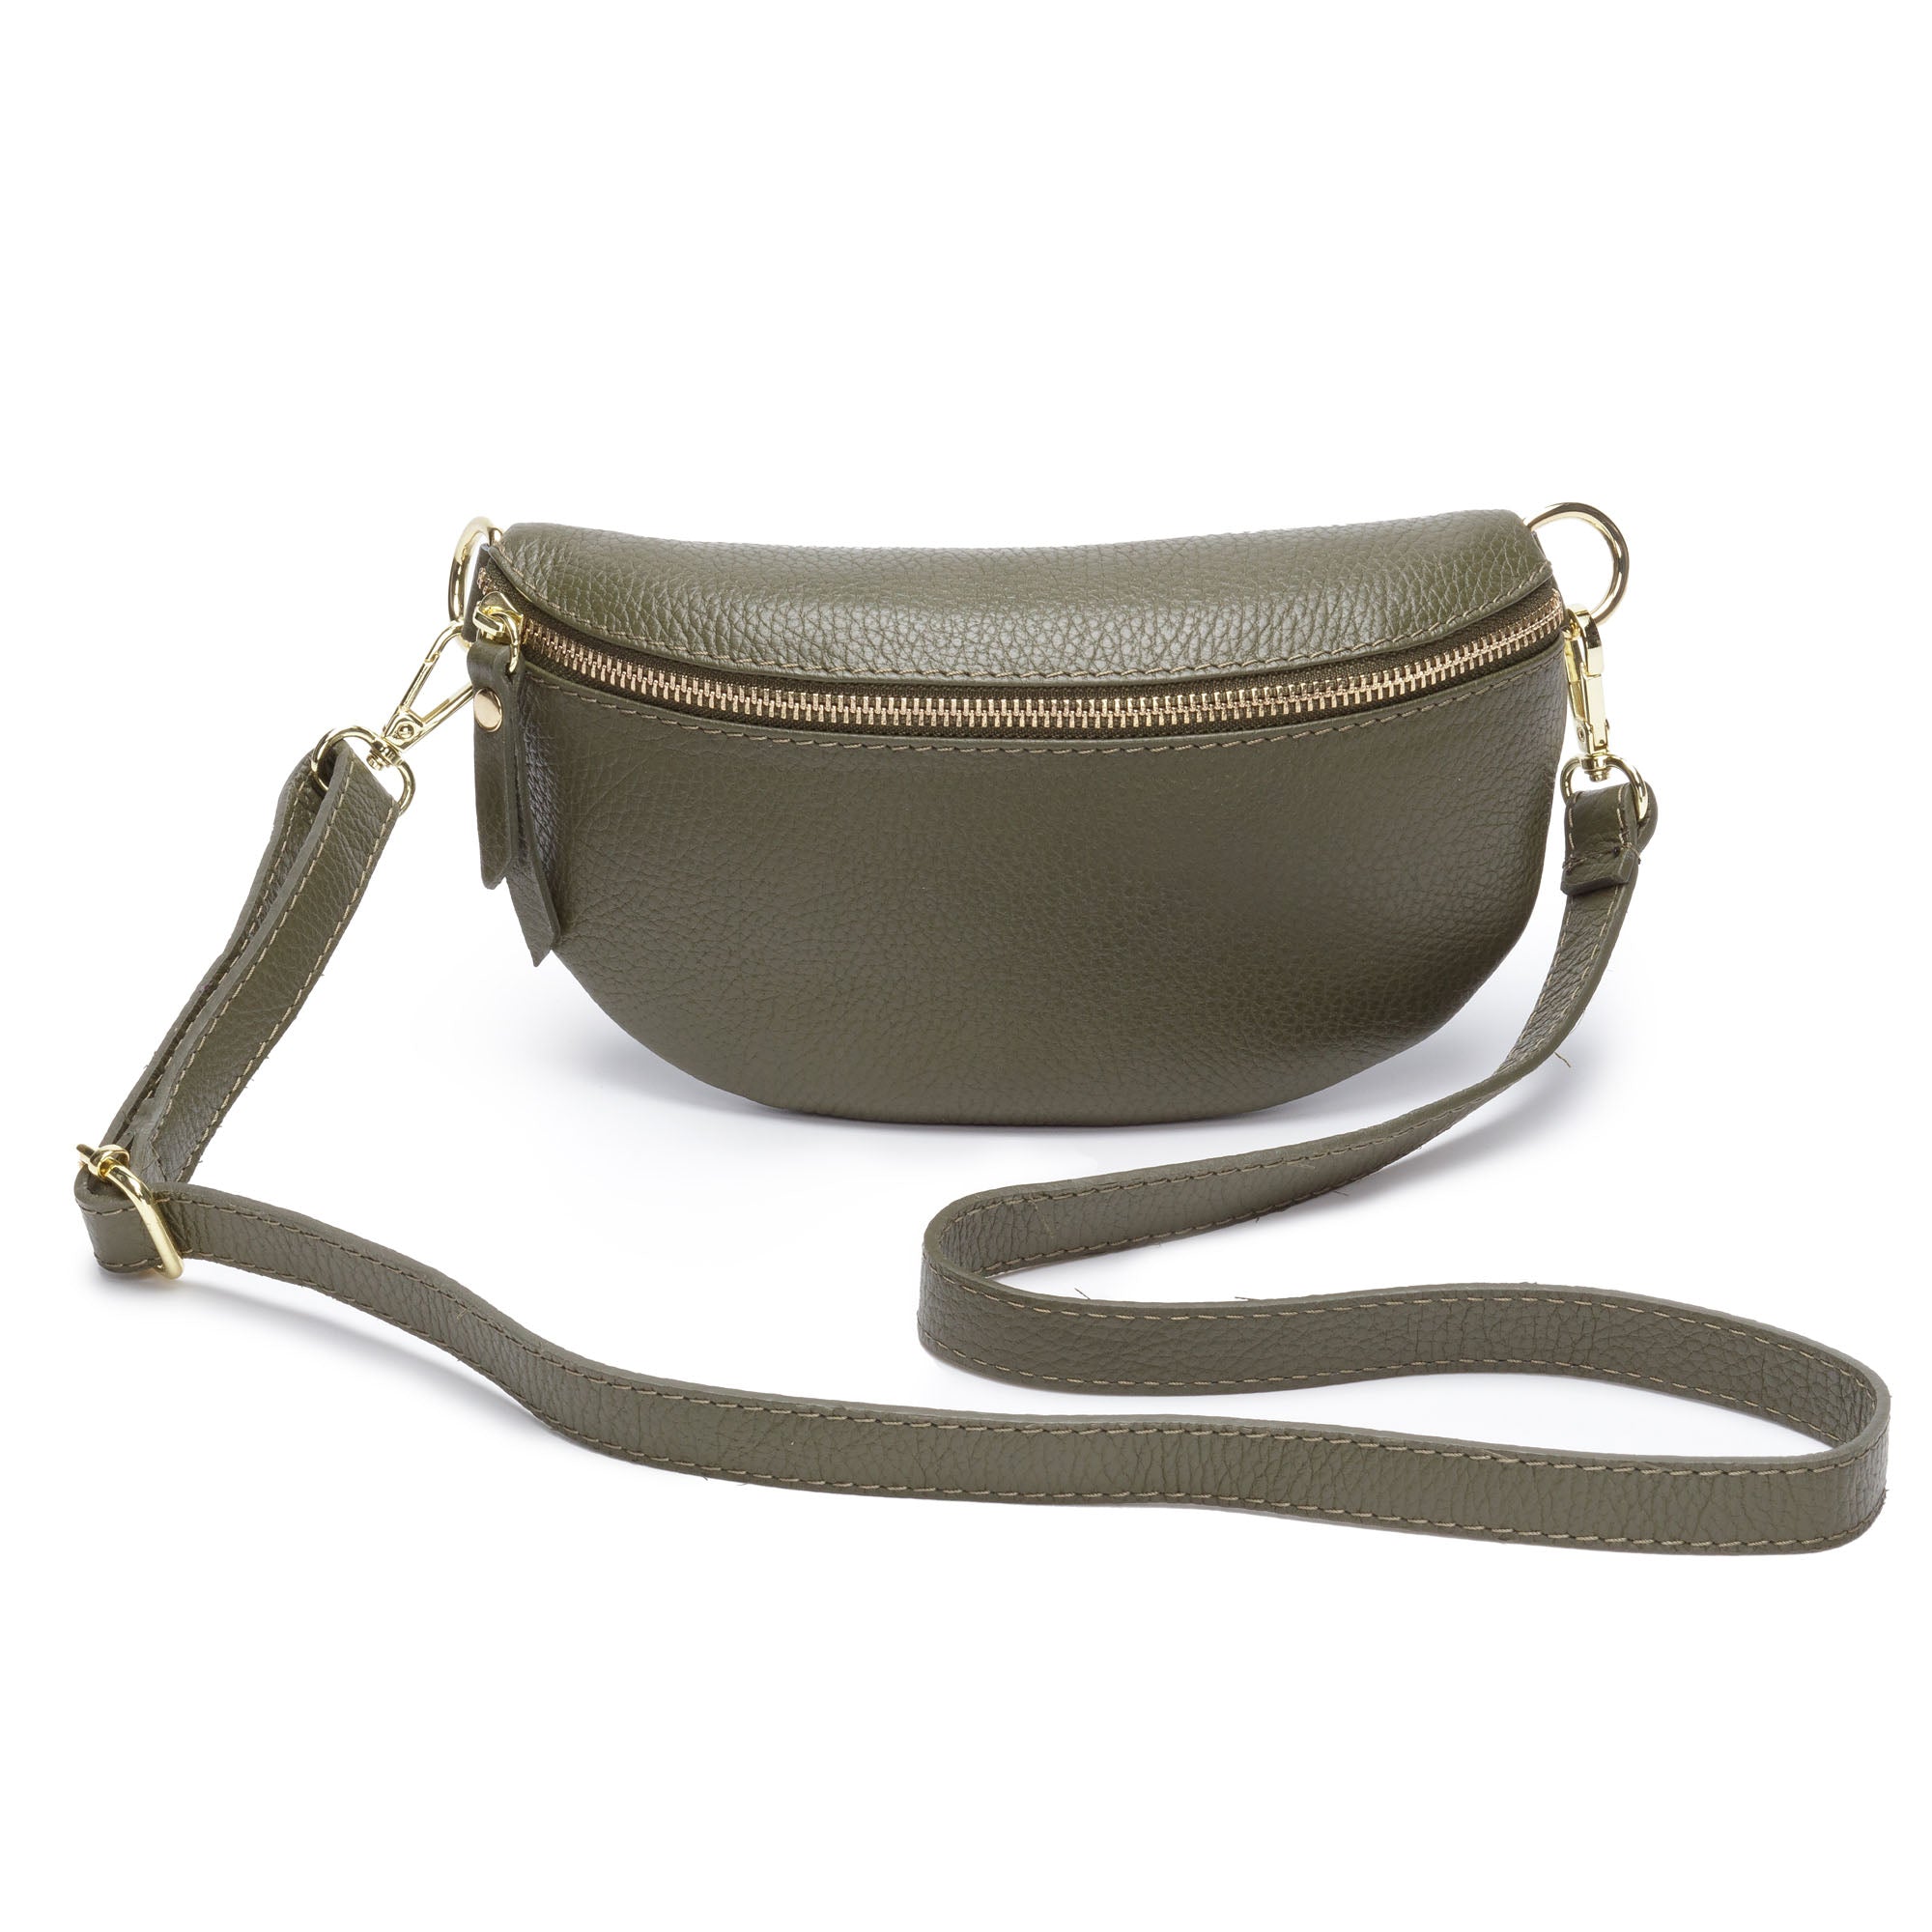 Sling Bag - Olive with Army Stripes Strap